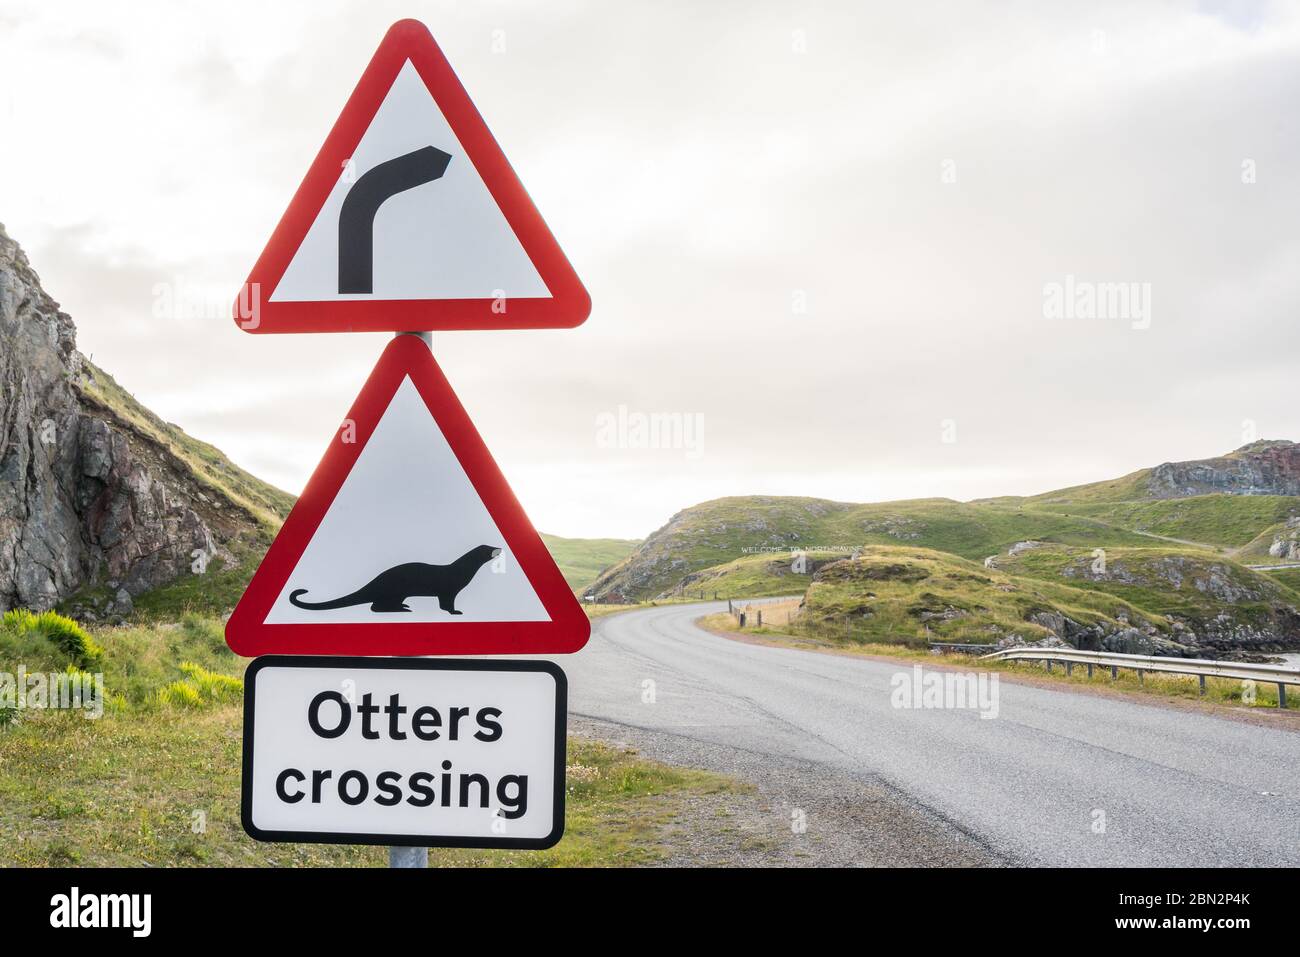 Dangerous right curve and Otters crossing ahead. Red warning road sign along a highway in the scottish highlands. Scotland, UK, on a cloudy day Stock Photo